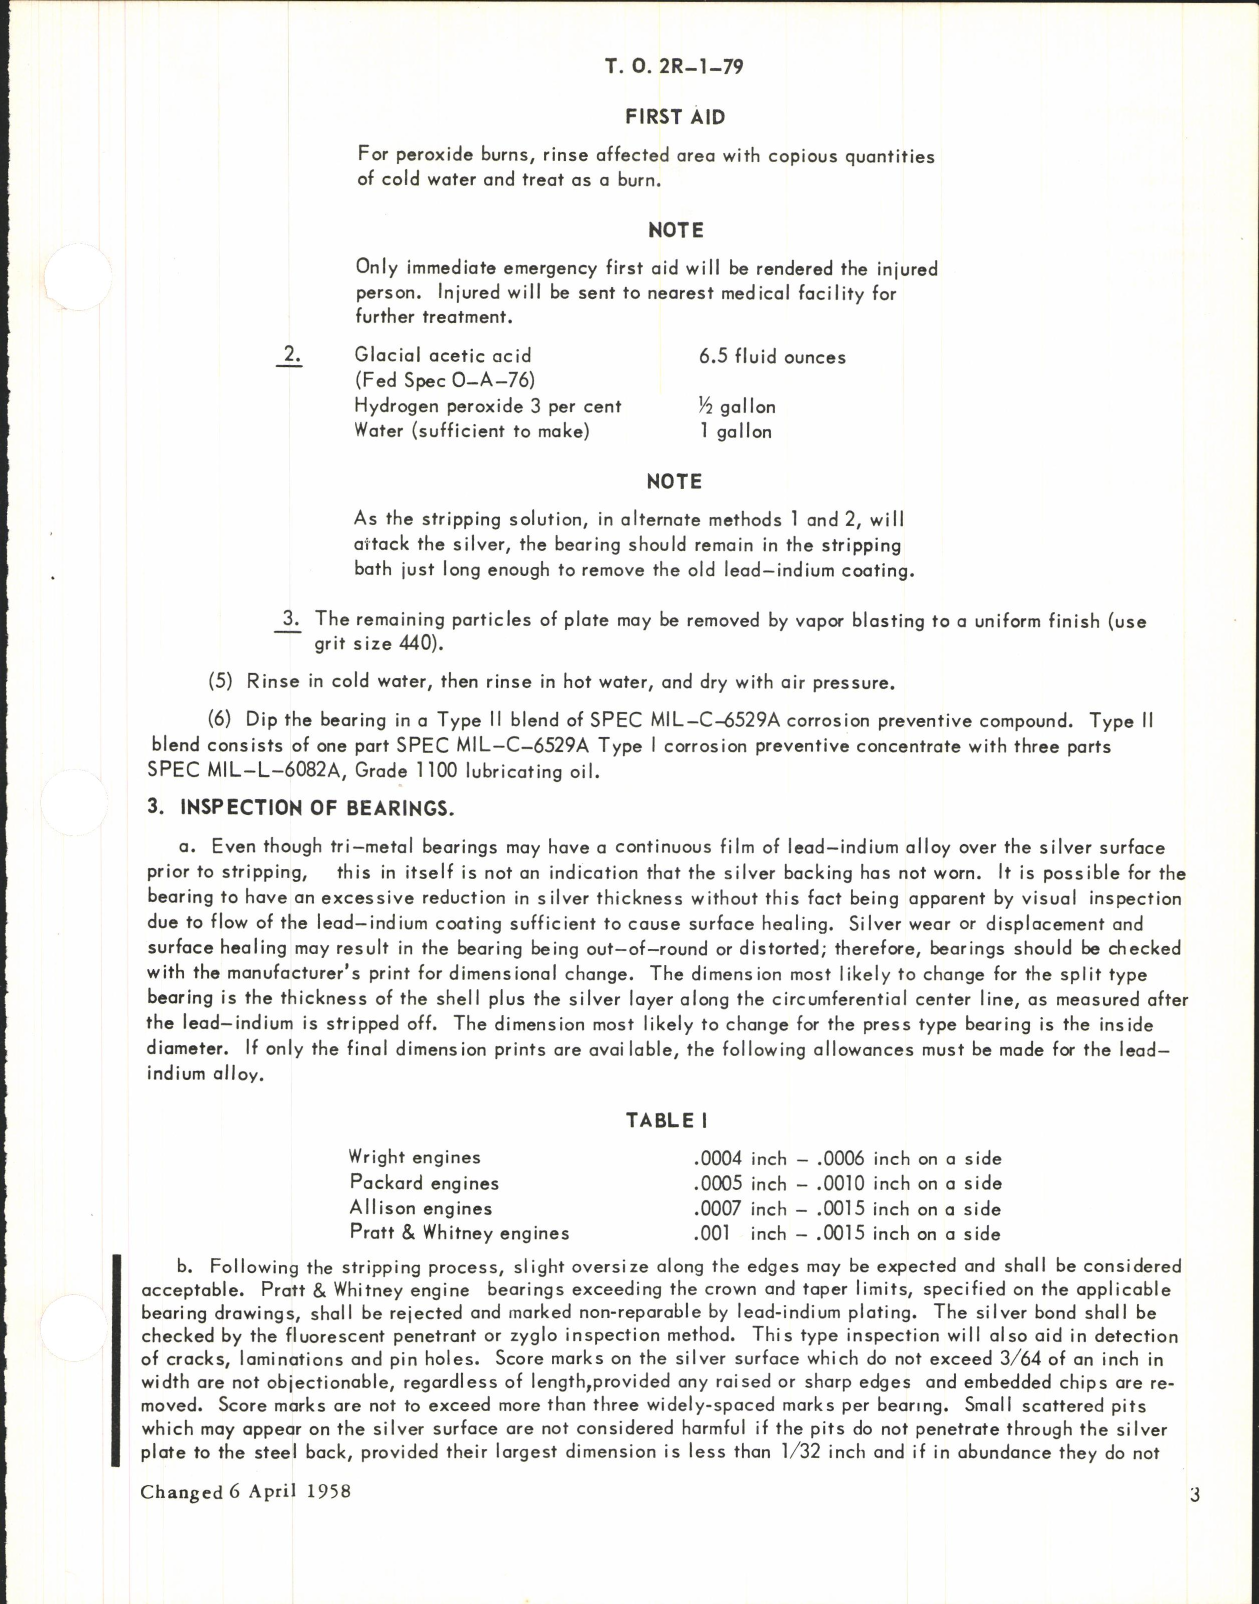 Sample page 5 from AirCorps Library document: Lead and Indium Plating on Bronze, Lead-Copper, and Silver Bearings in Aircraft Engines